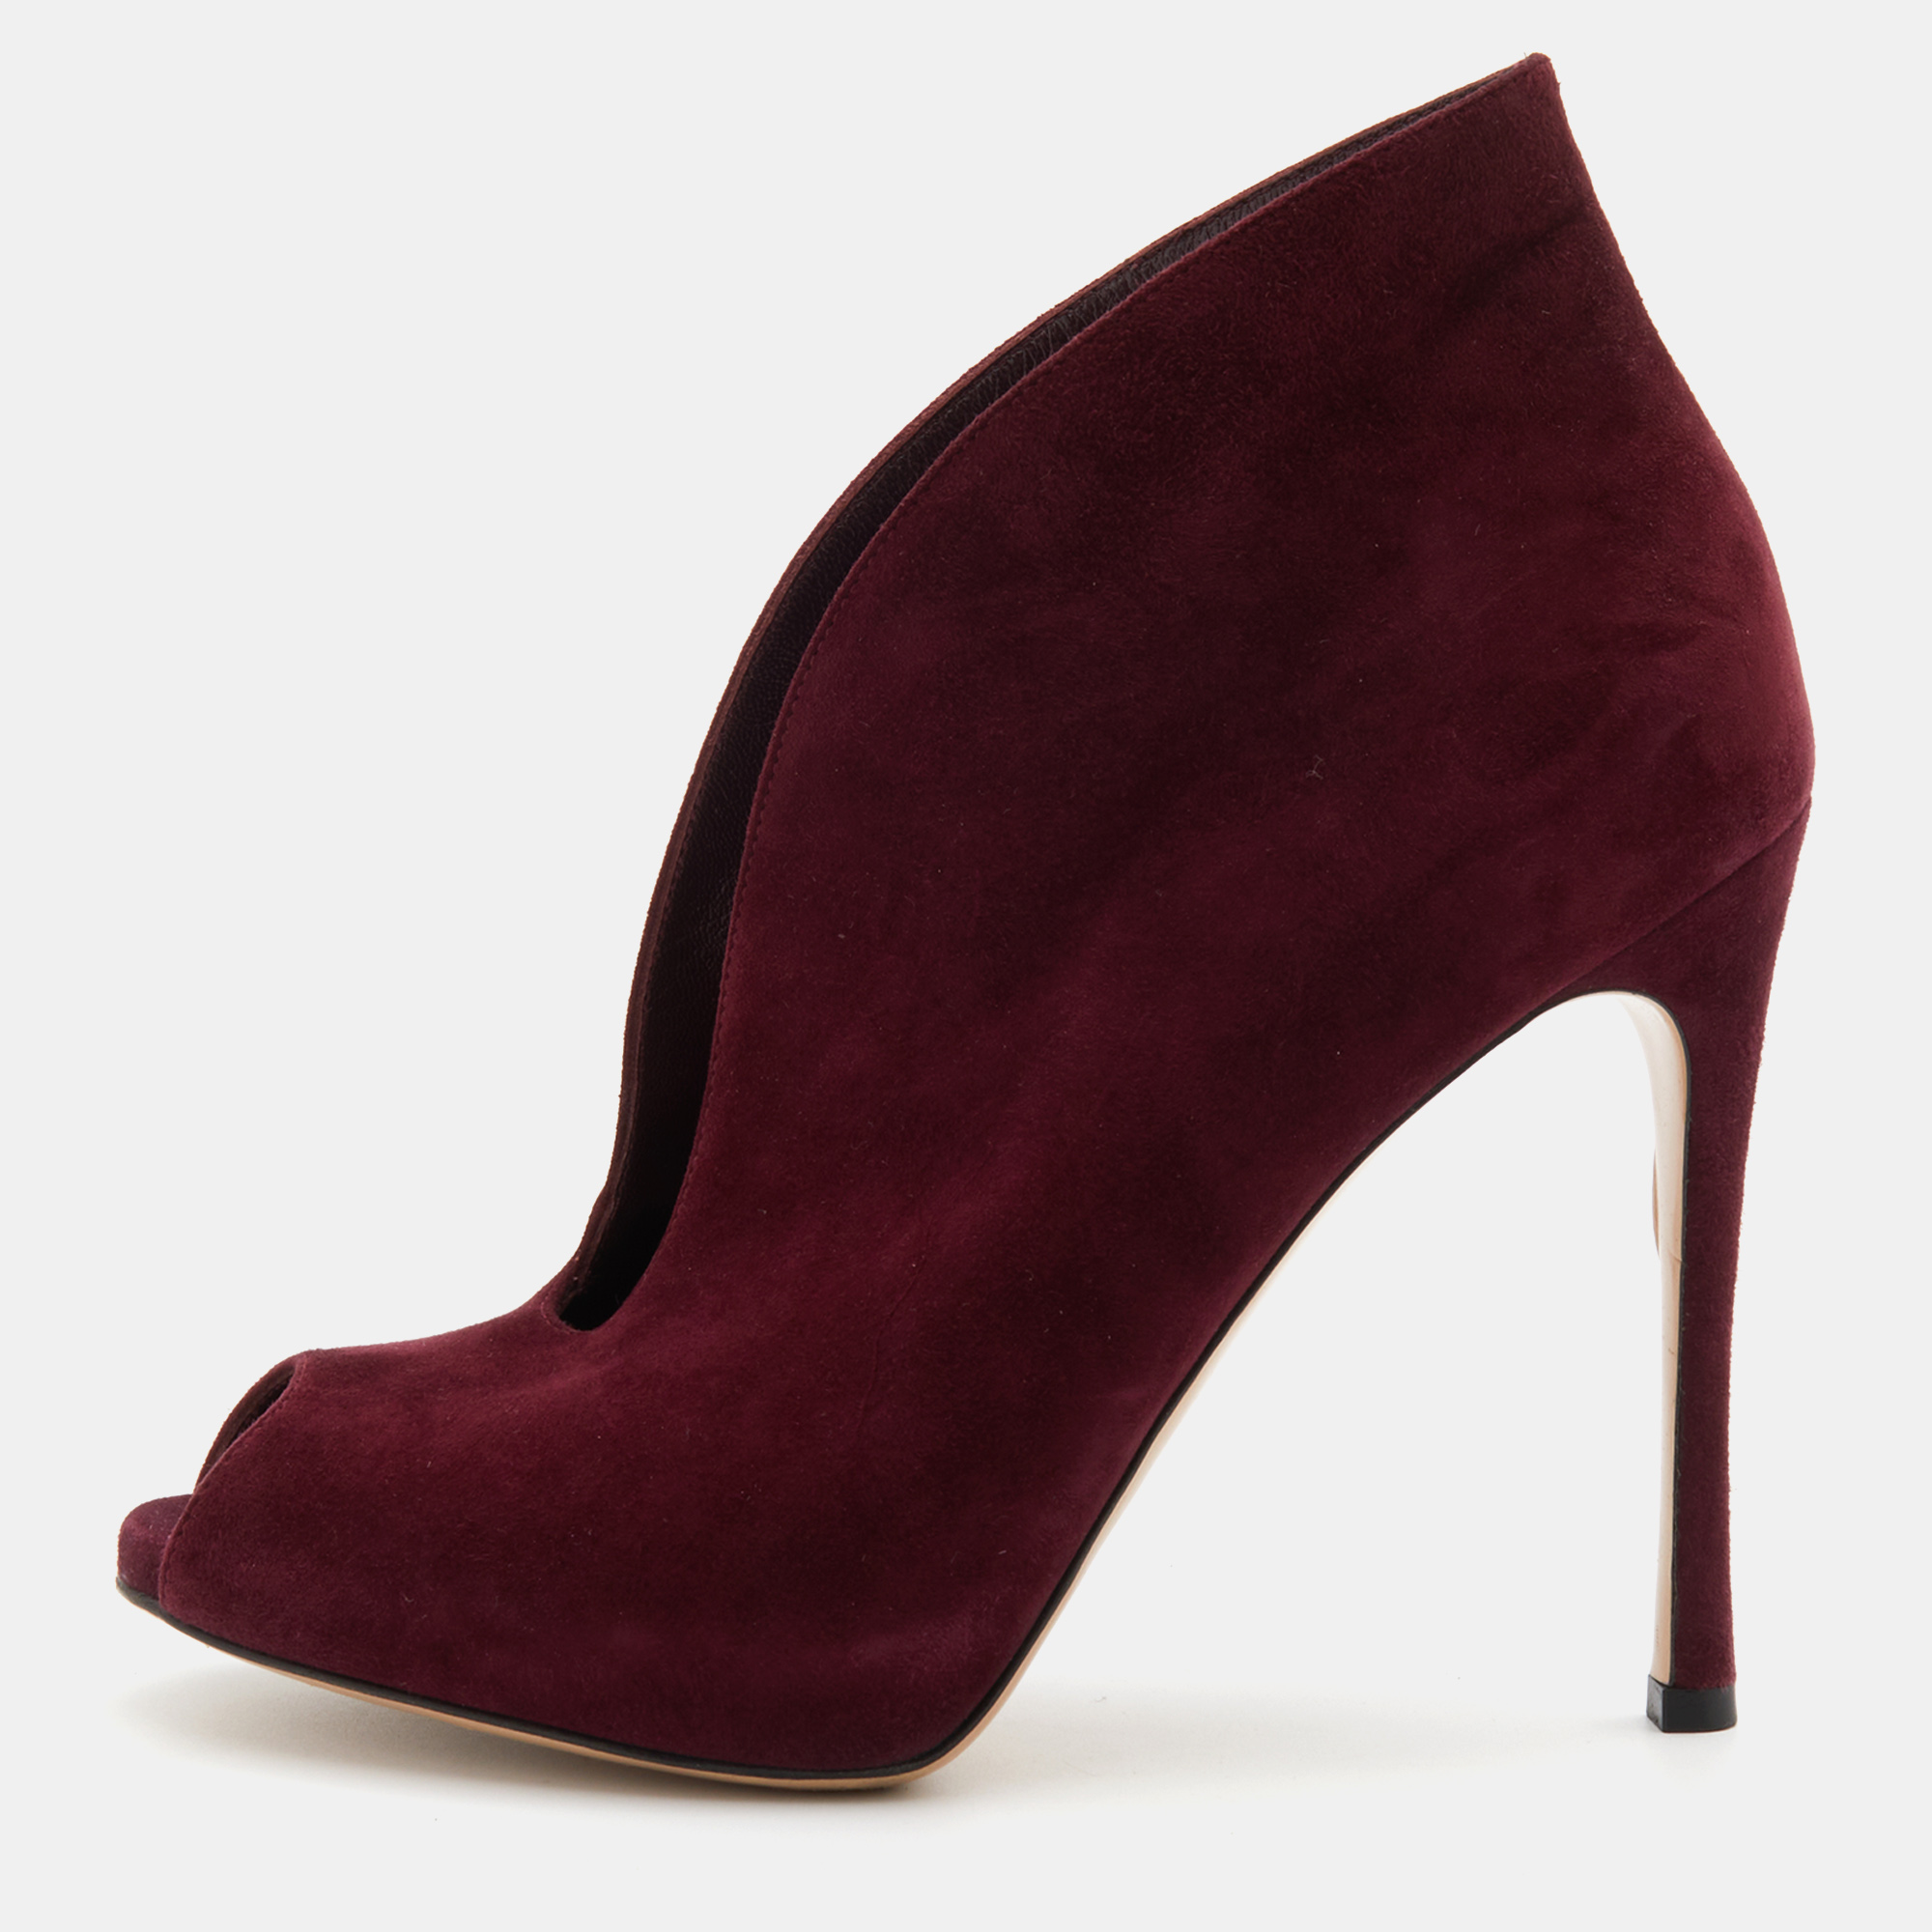 Pre-owned Gianvito Rossi Burgundy Suede Vamp Platform Booties Size 37.5